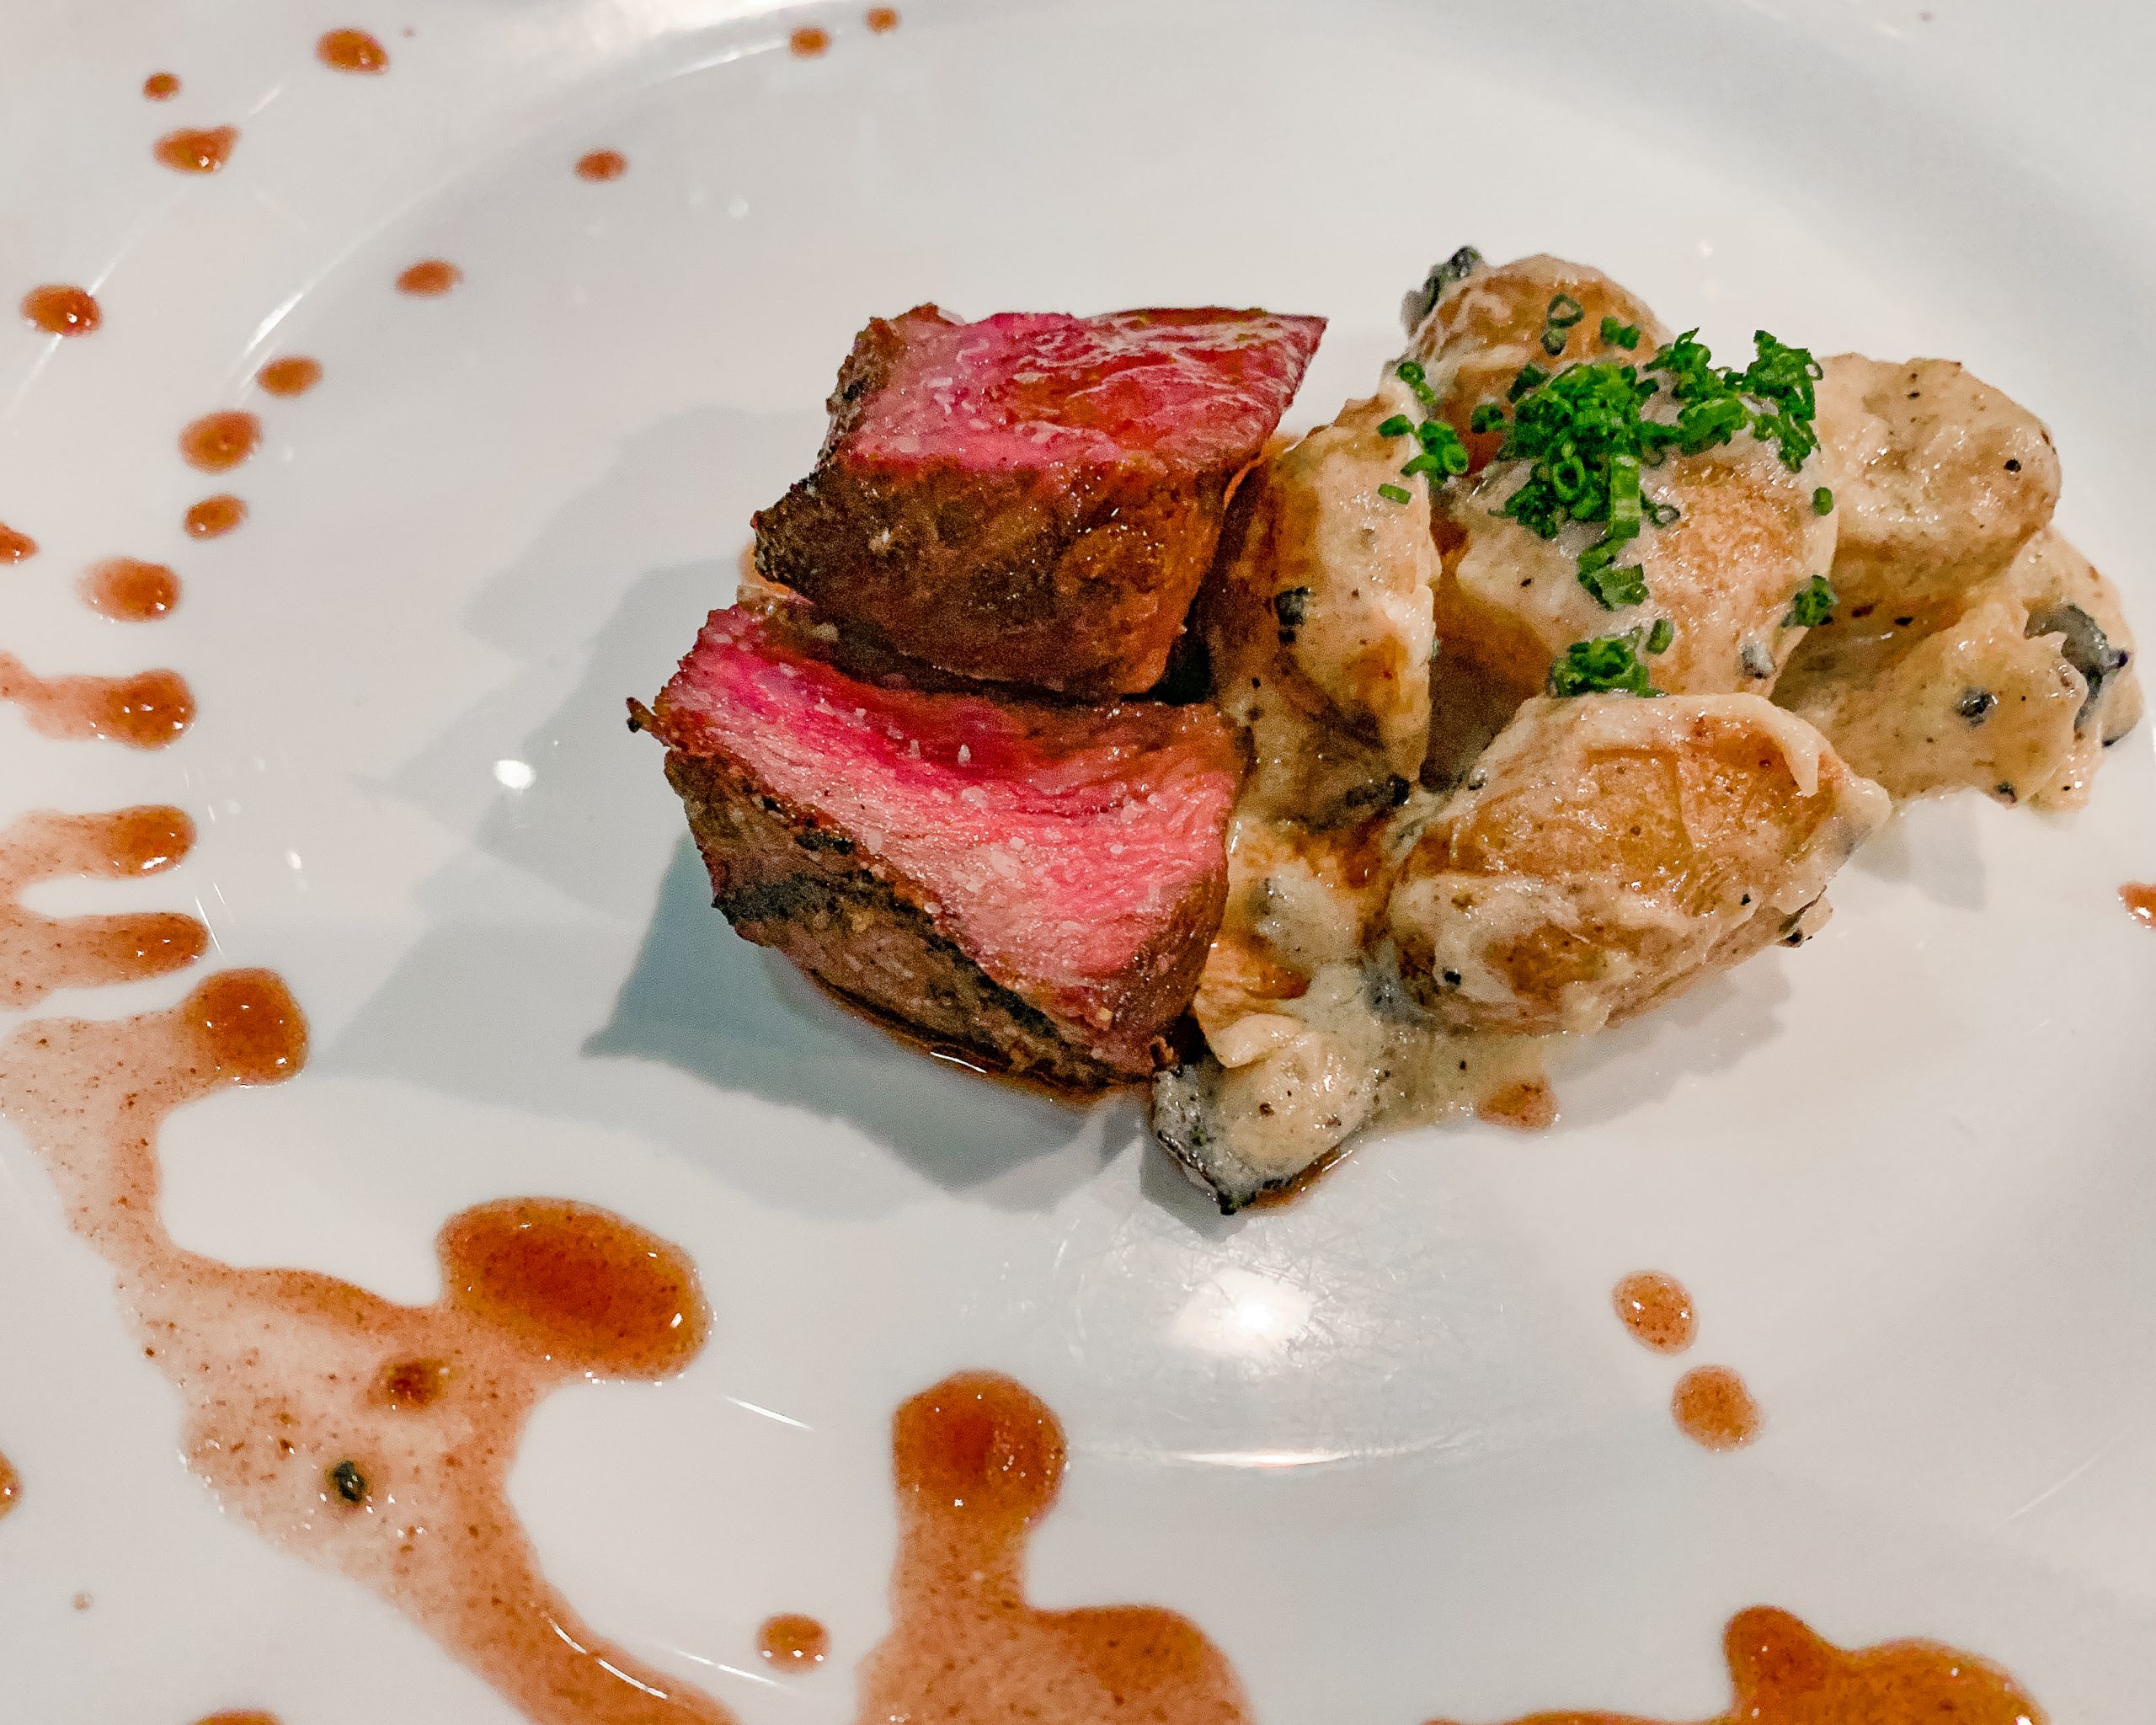 Grilled Wagyu Beef with warm dijon fingerling potatoes and black truffles.